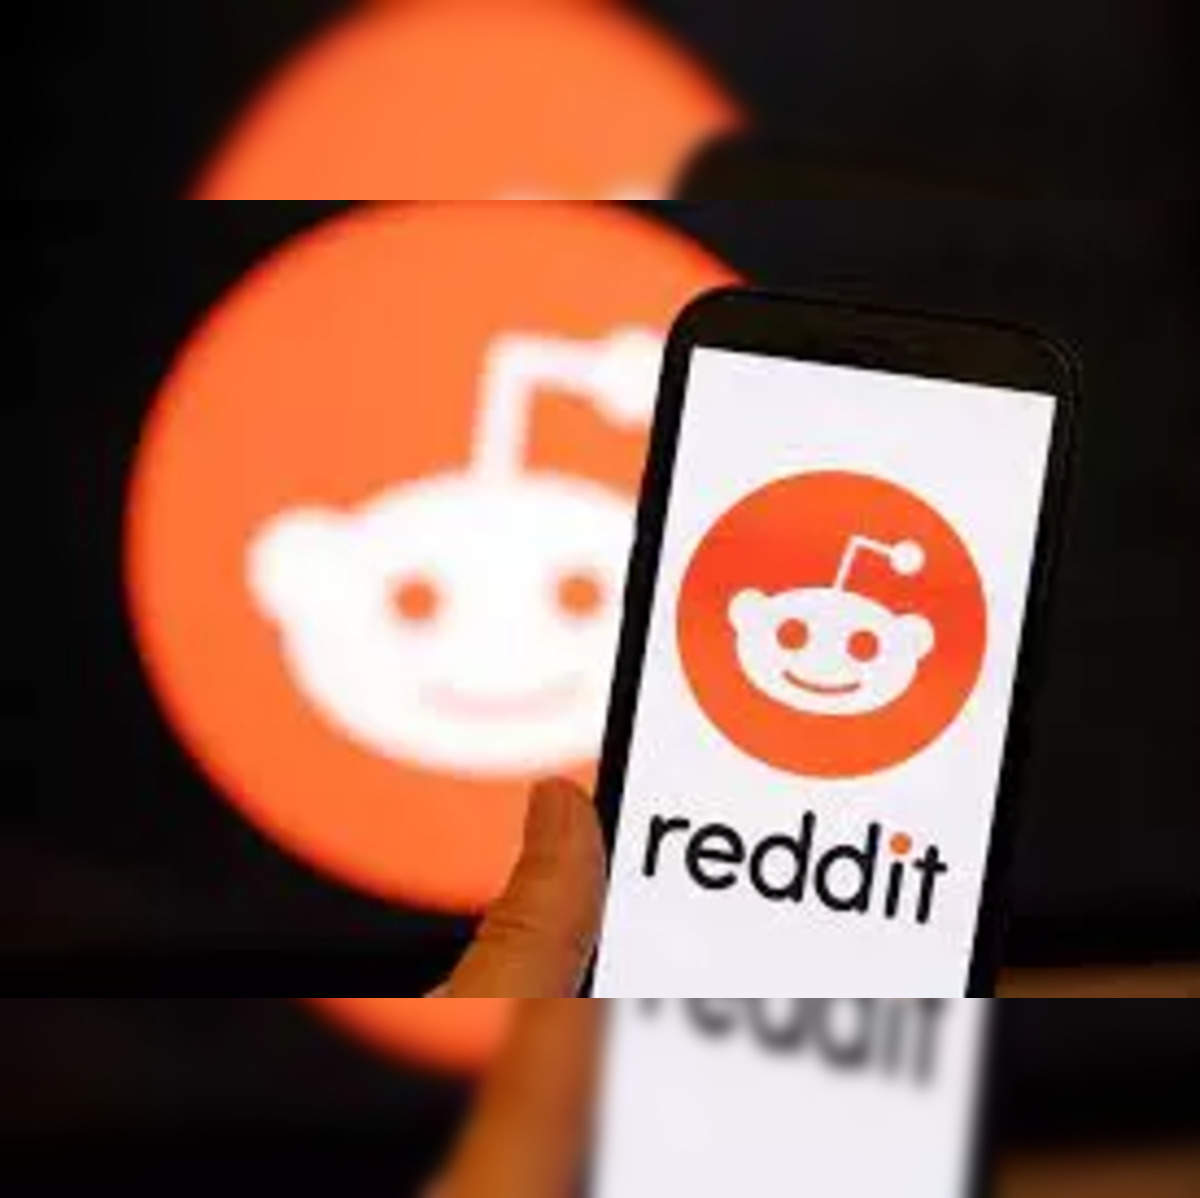 Reddit removes chat history prior to 2023